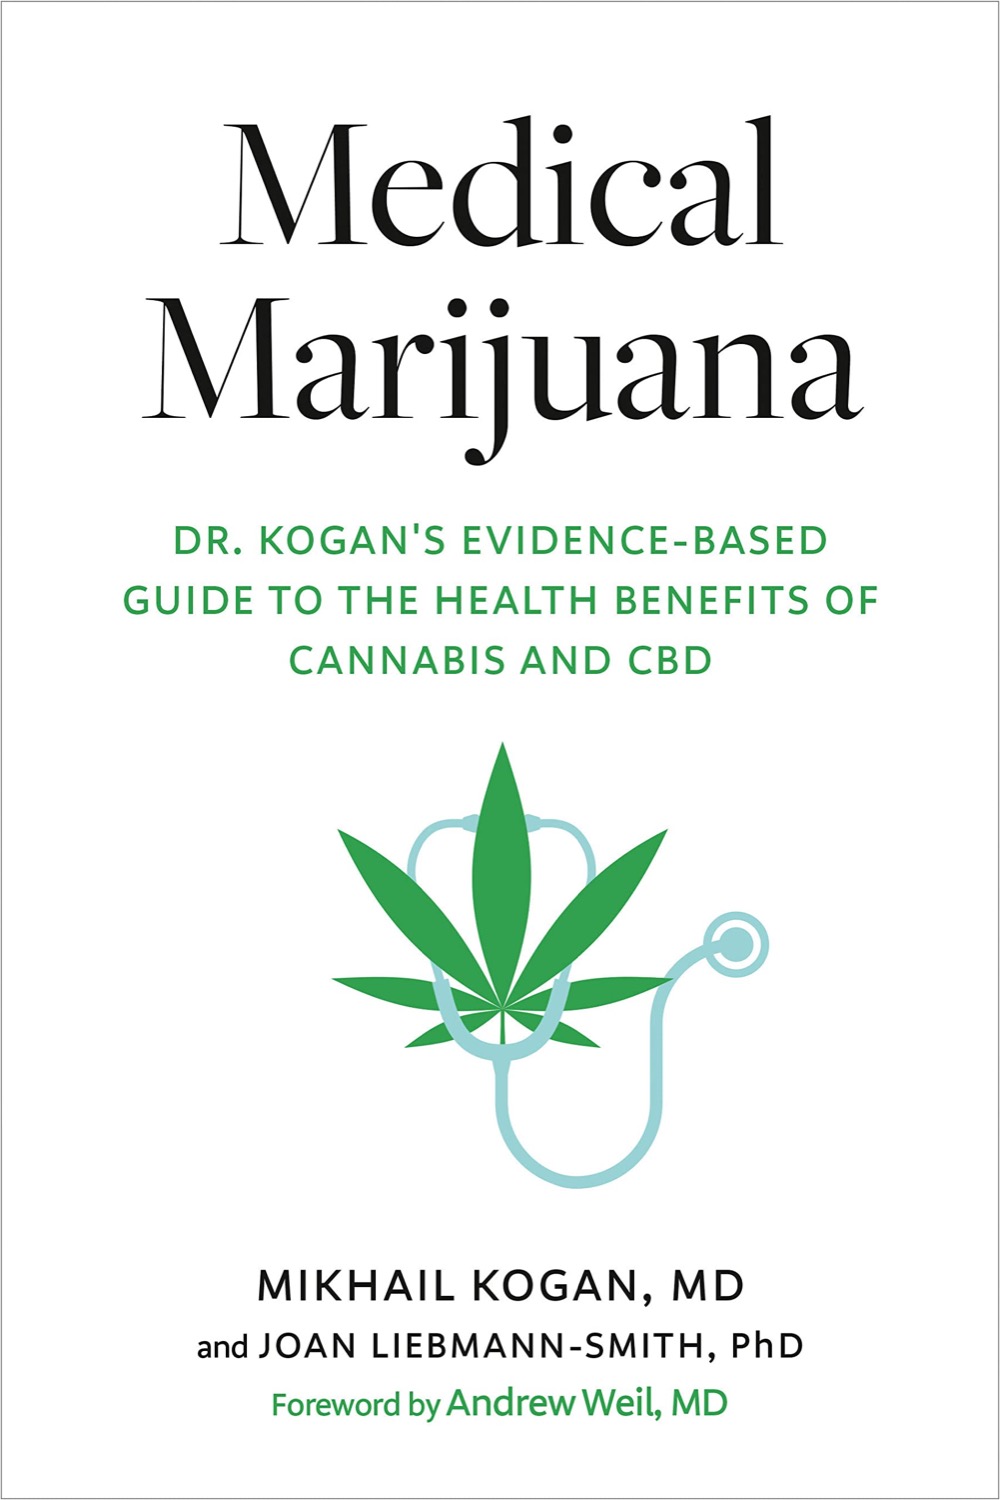 a book cover with a simple illustration of a marijuana leaf with text 'Medical Marijuana: Dr. Kogan’s Evidence-Based Guide to the Health Benefits of Cannabis and CBD by Mikhail Kogan'